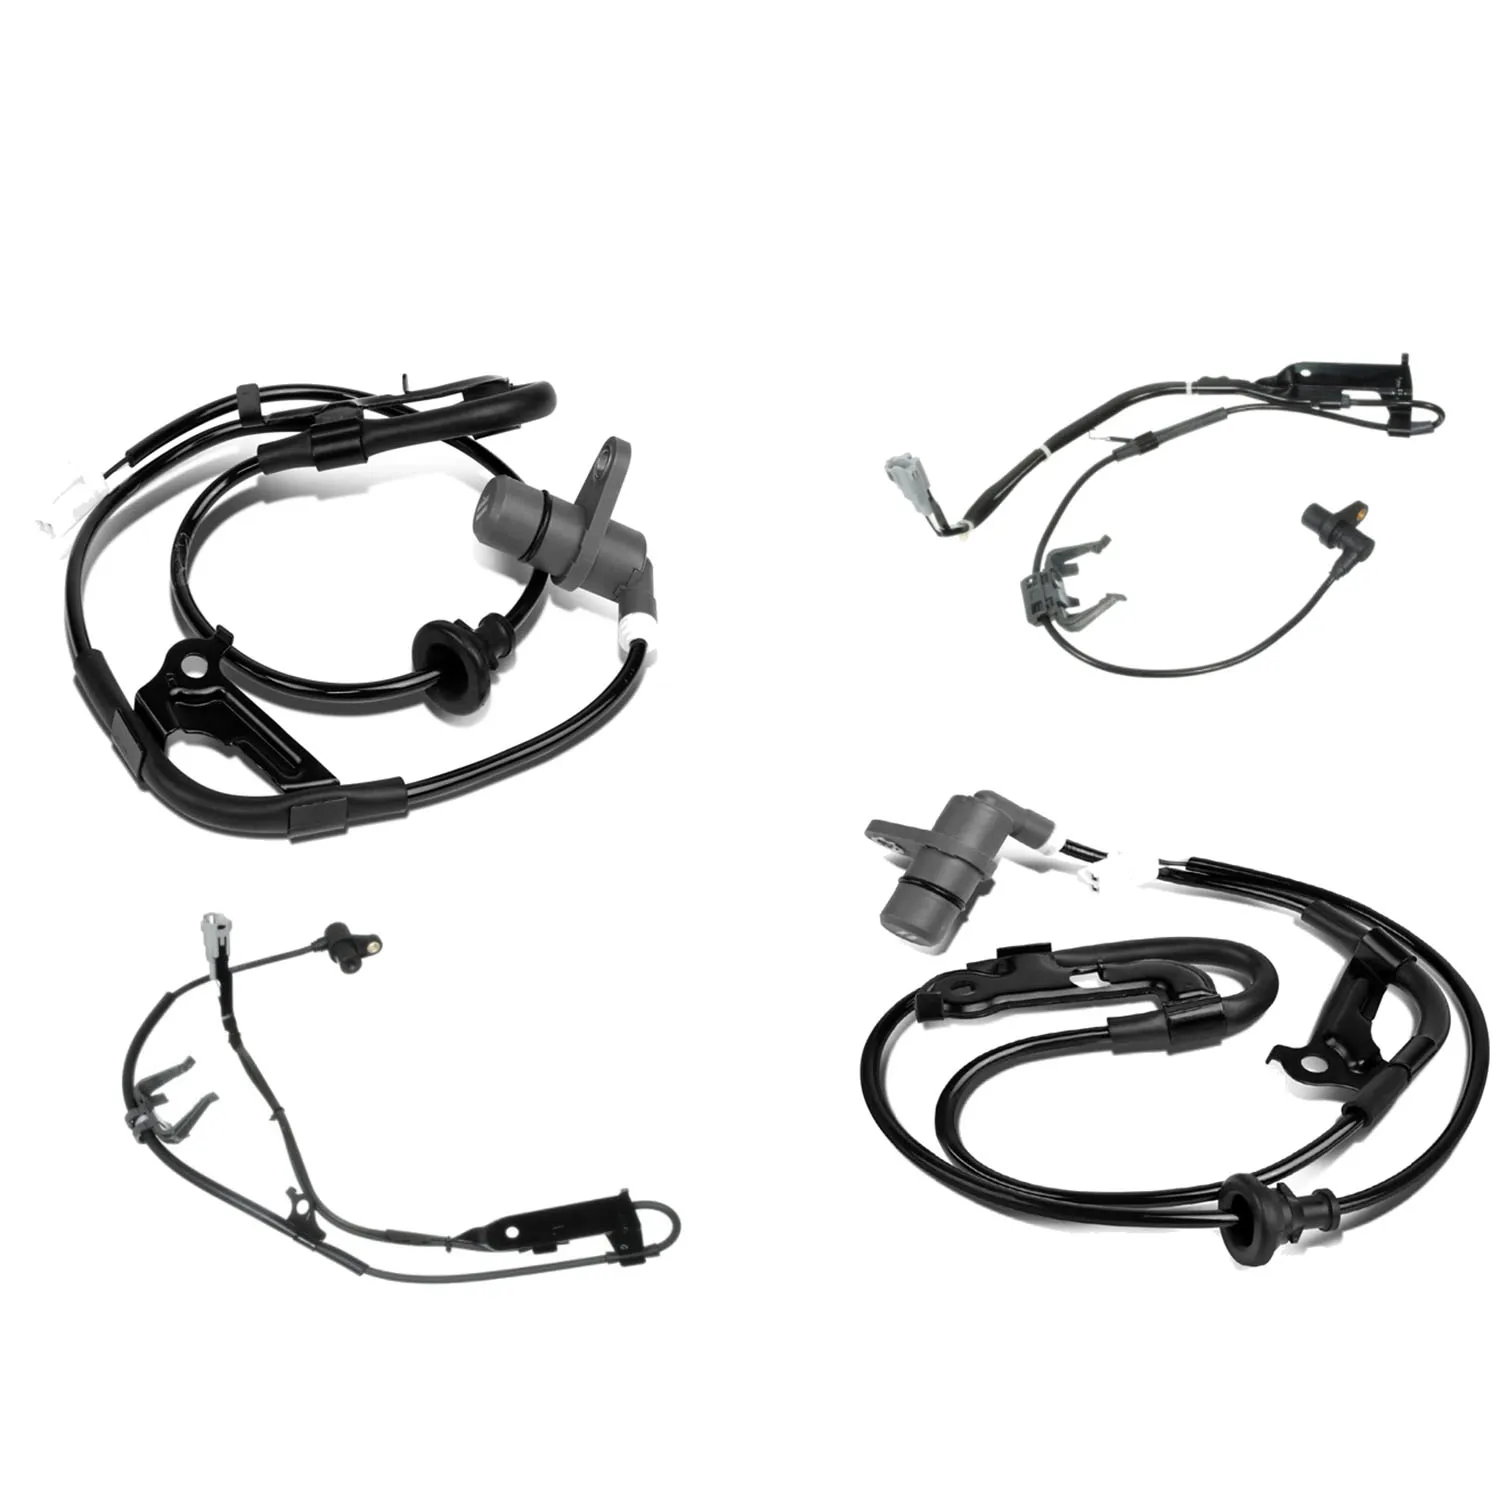 

4Pcs Front-Rear / Left & Right ABS Wheel Speed Sensor for Toyota Camry 1997-2001/Avalon 1997-2004/Lexus ES300 1997-2001